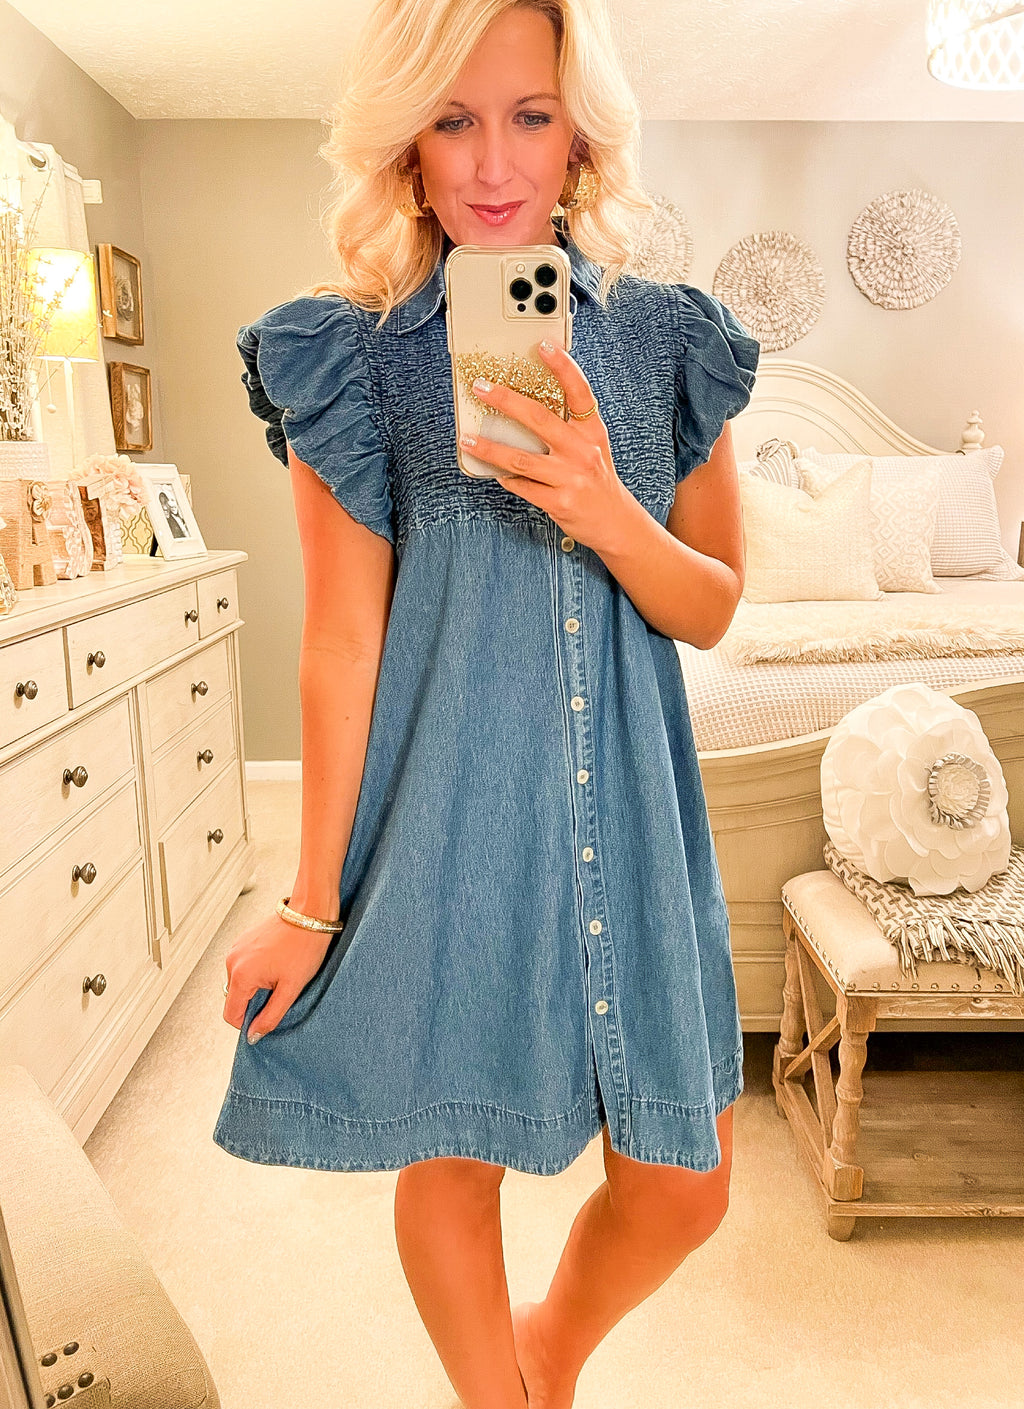 Denim Button Down Smocked Dress with Ruffle Sleeves